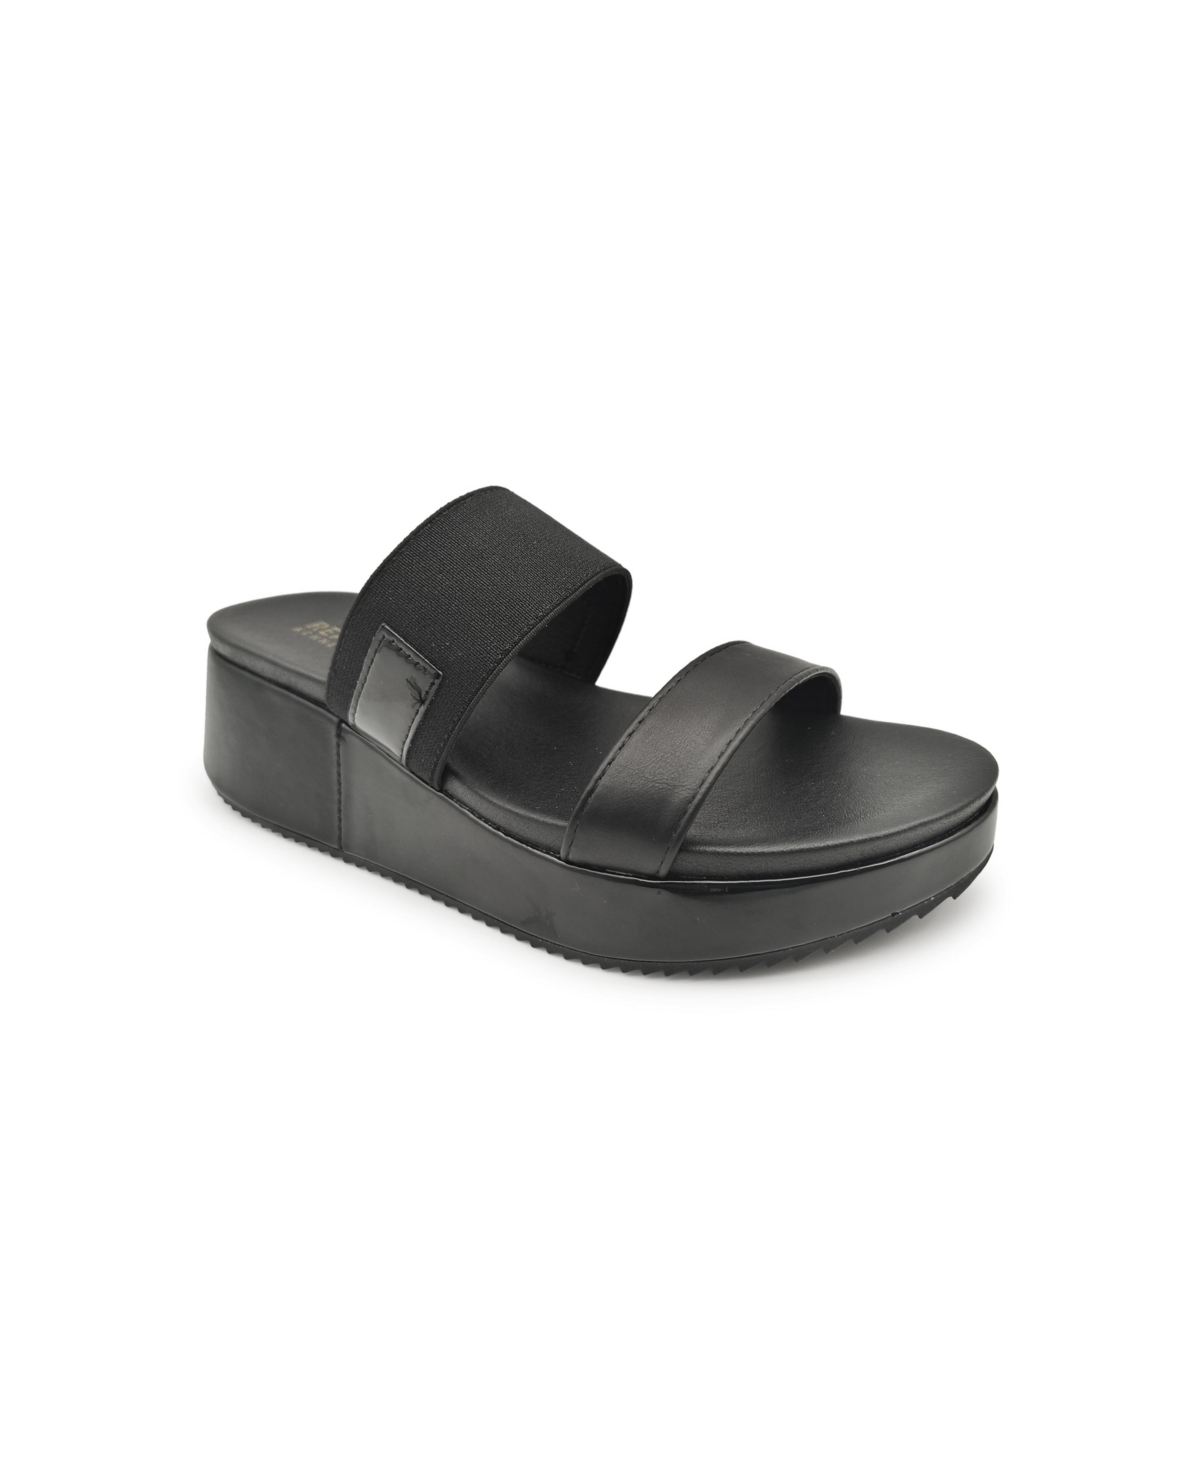 Women's Perry Wedge Sandals - Black